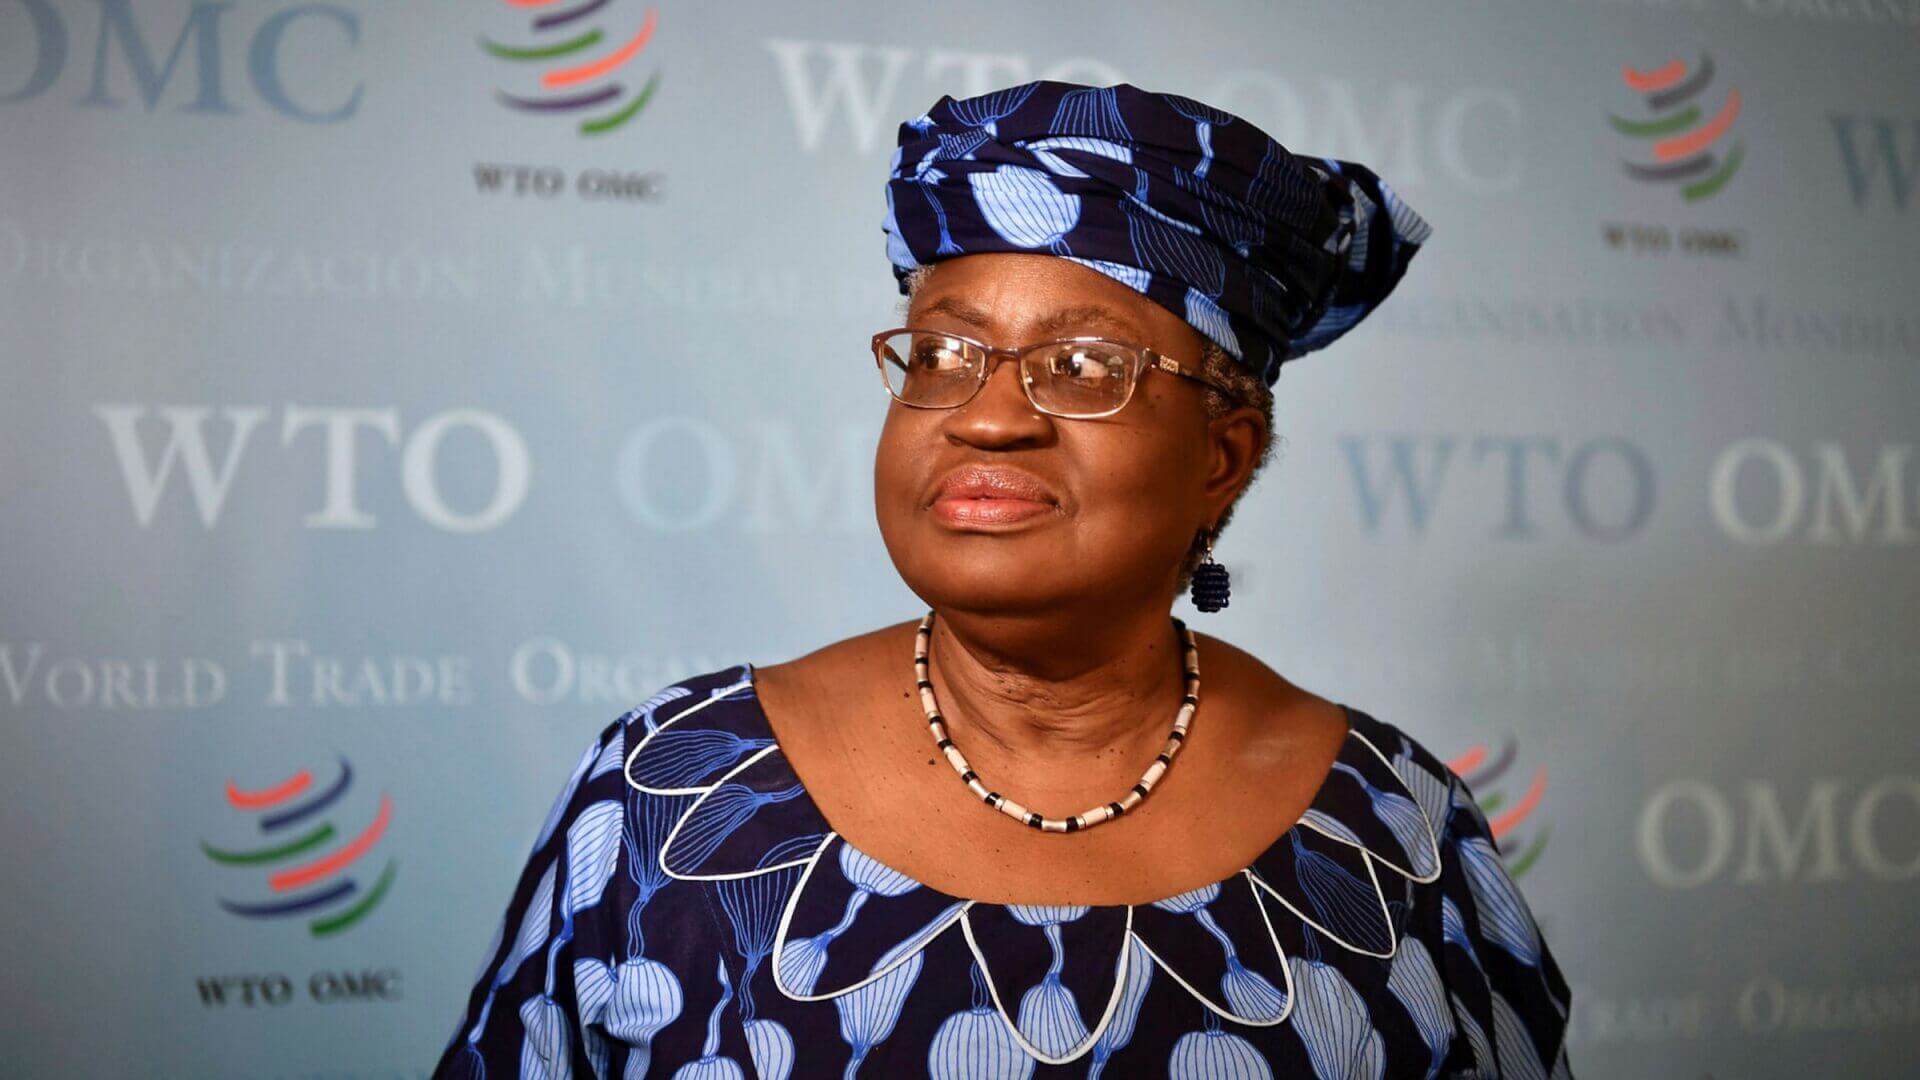 Okonjo-Iweala Appointed as New WTO Director-General After Months of US Opposition